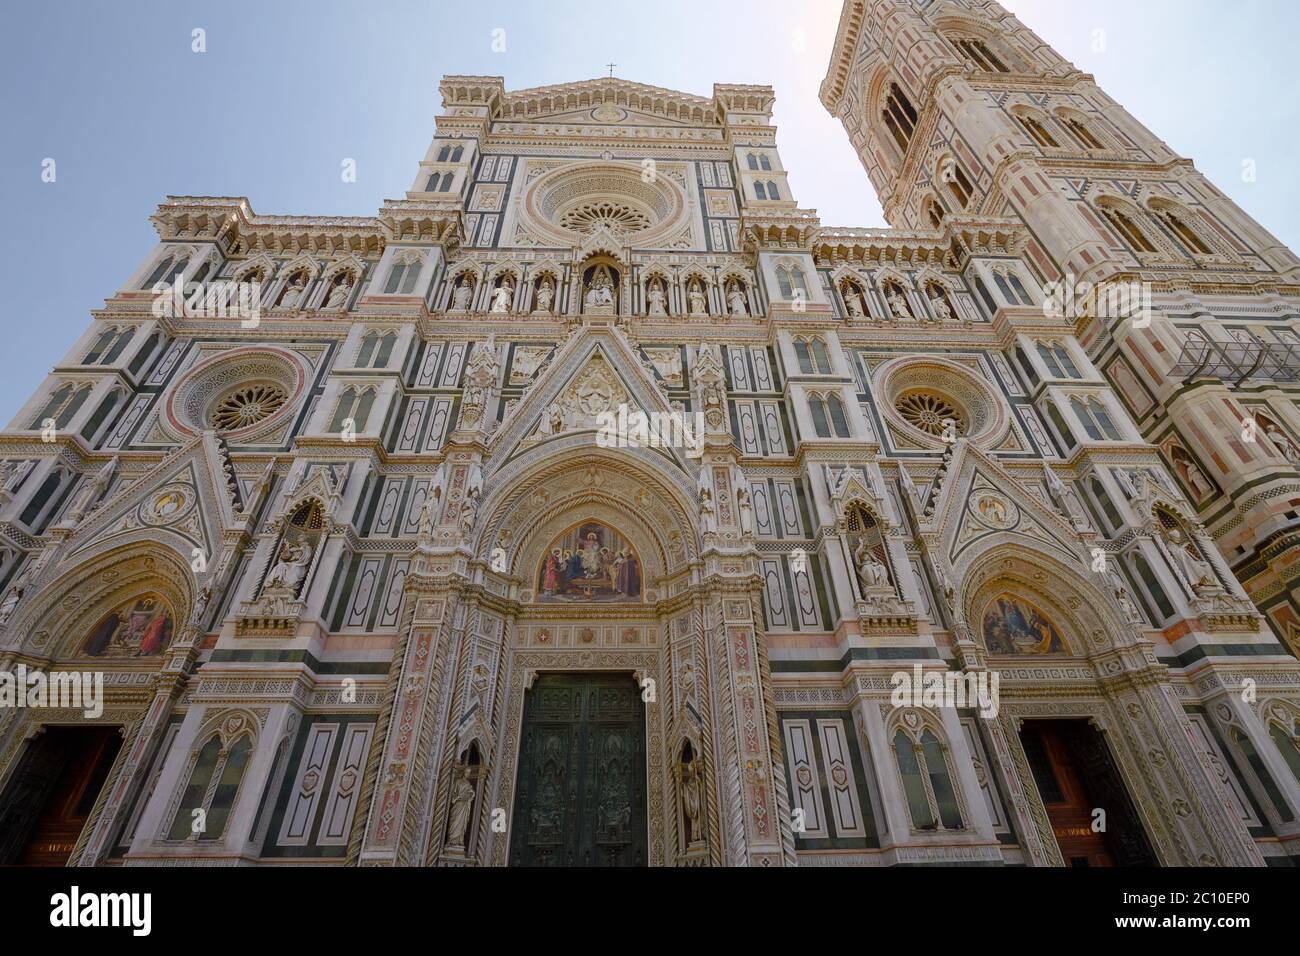 Cathedral of Saint Mary of the Flower in Florence Italy (Cattedrale di Santa Maria del Fiore) Stock Photo